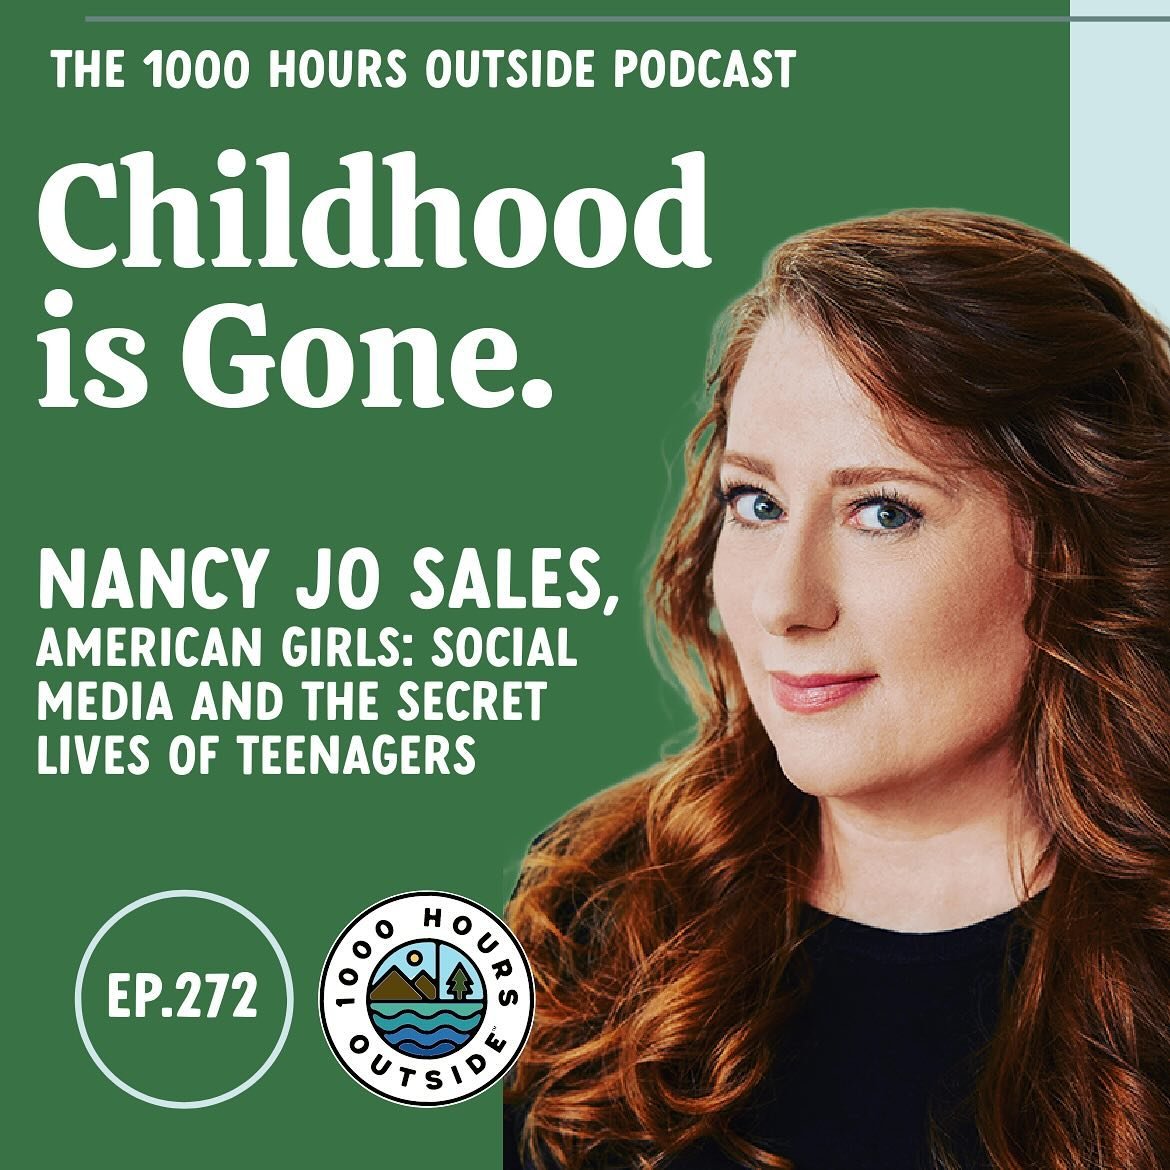 It&rsquo;s live! ➡️ Save and share!

Nancy Jo&rsquo;s book American Girls is one of the most eye opening I&rsquo;ve ever read and this conversation is a must listen for all parents and grandparents &hearts;️.

As adults, must have a better understand